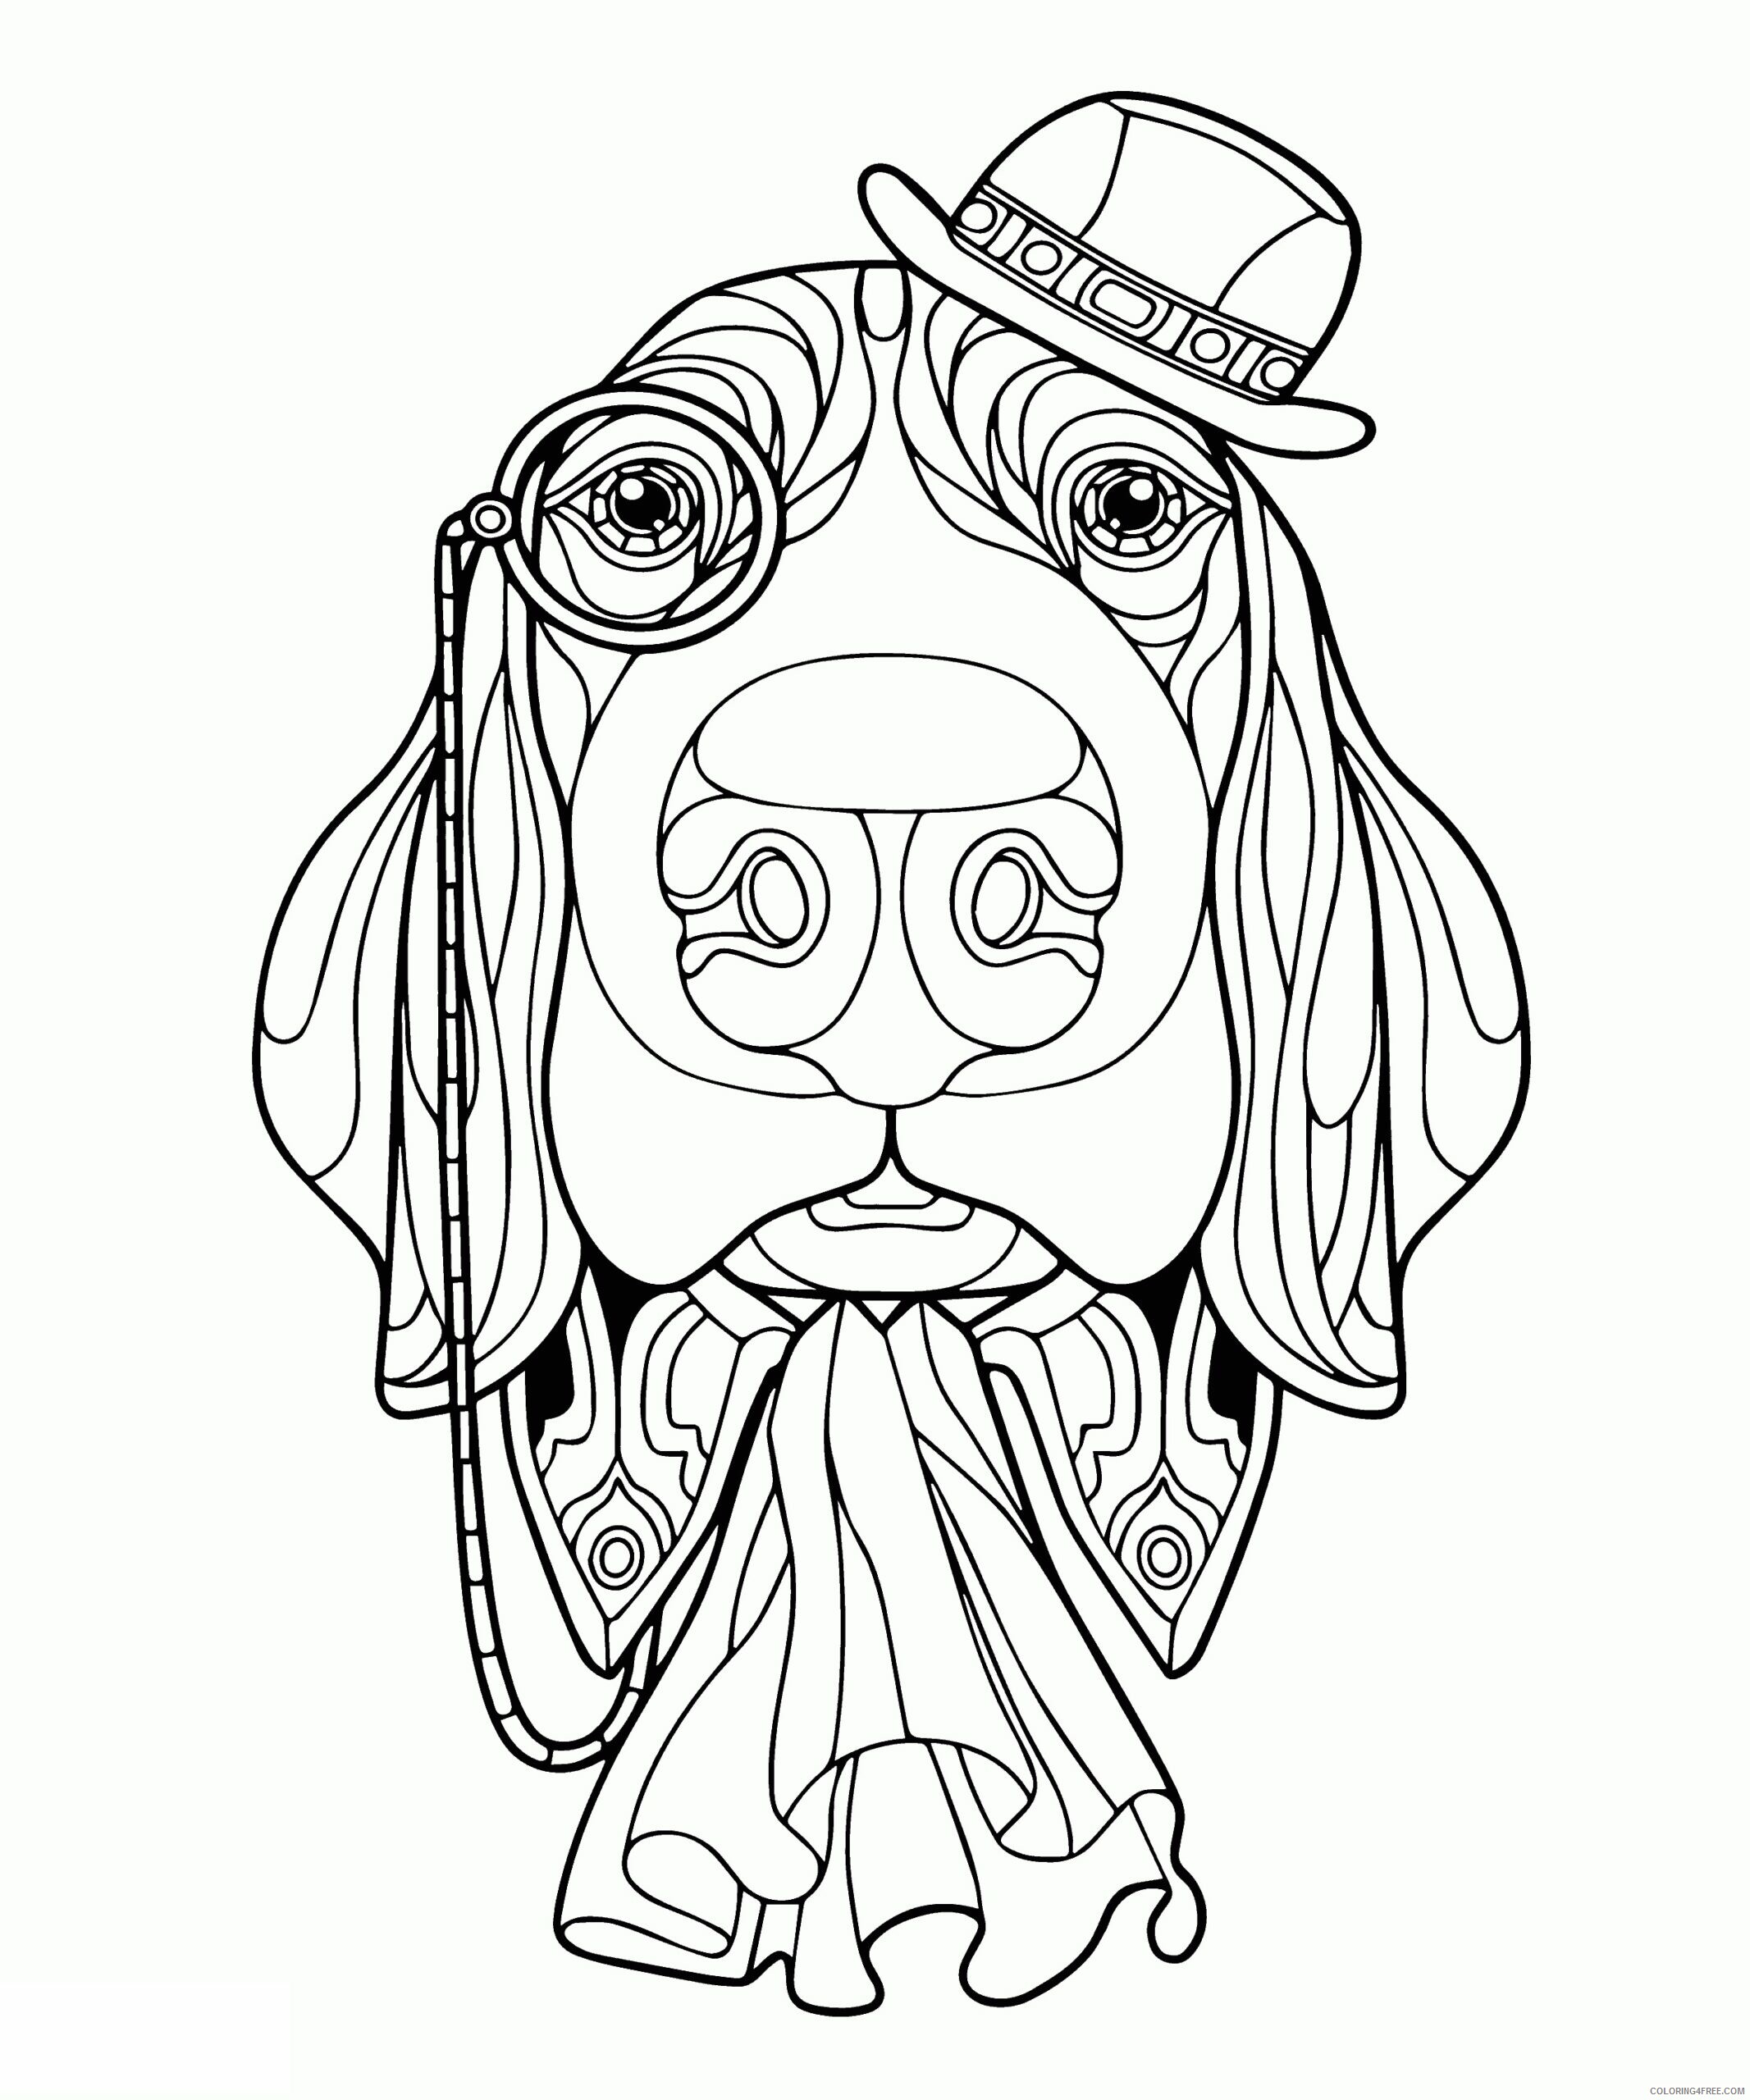 Adult Animal Coloring Pages Printable Sheets Dog To Print 2021 a 1746 Coloring4free